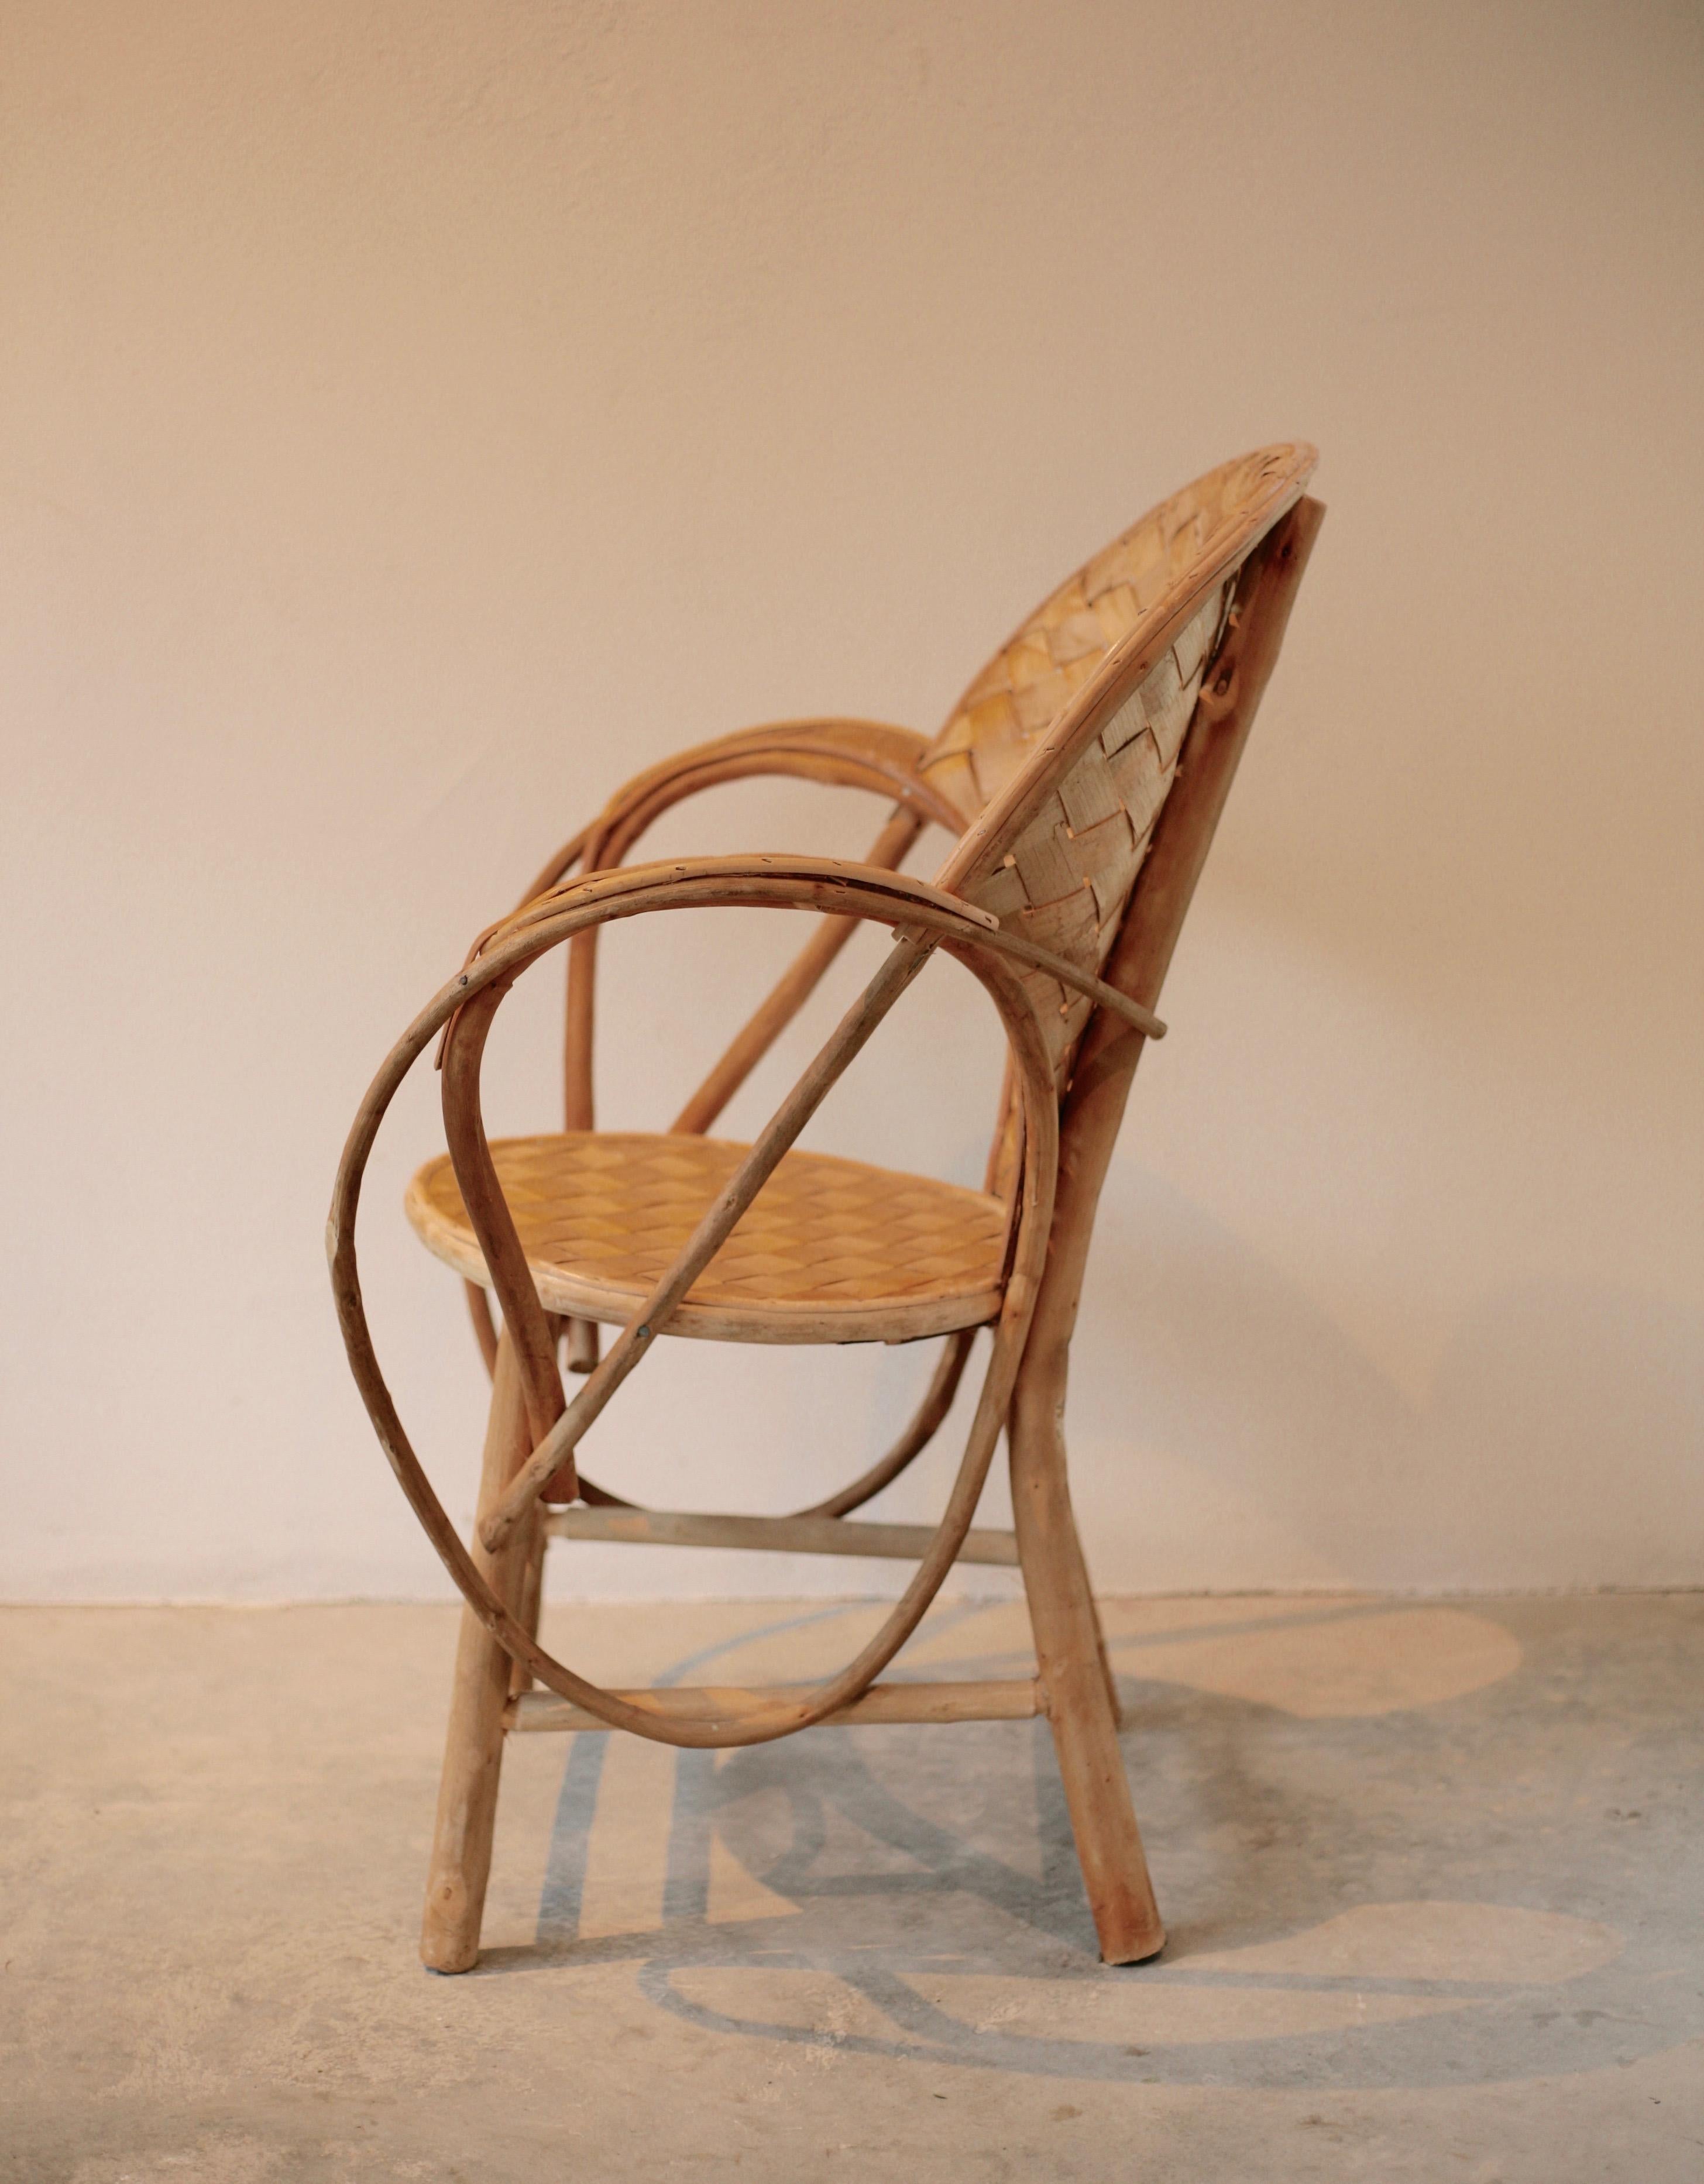 Set of 6 Wicker Chairs, Provence Chair, Designed by Le Corbusier In Fair Condition For Sale In Klintehamn, SE